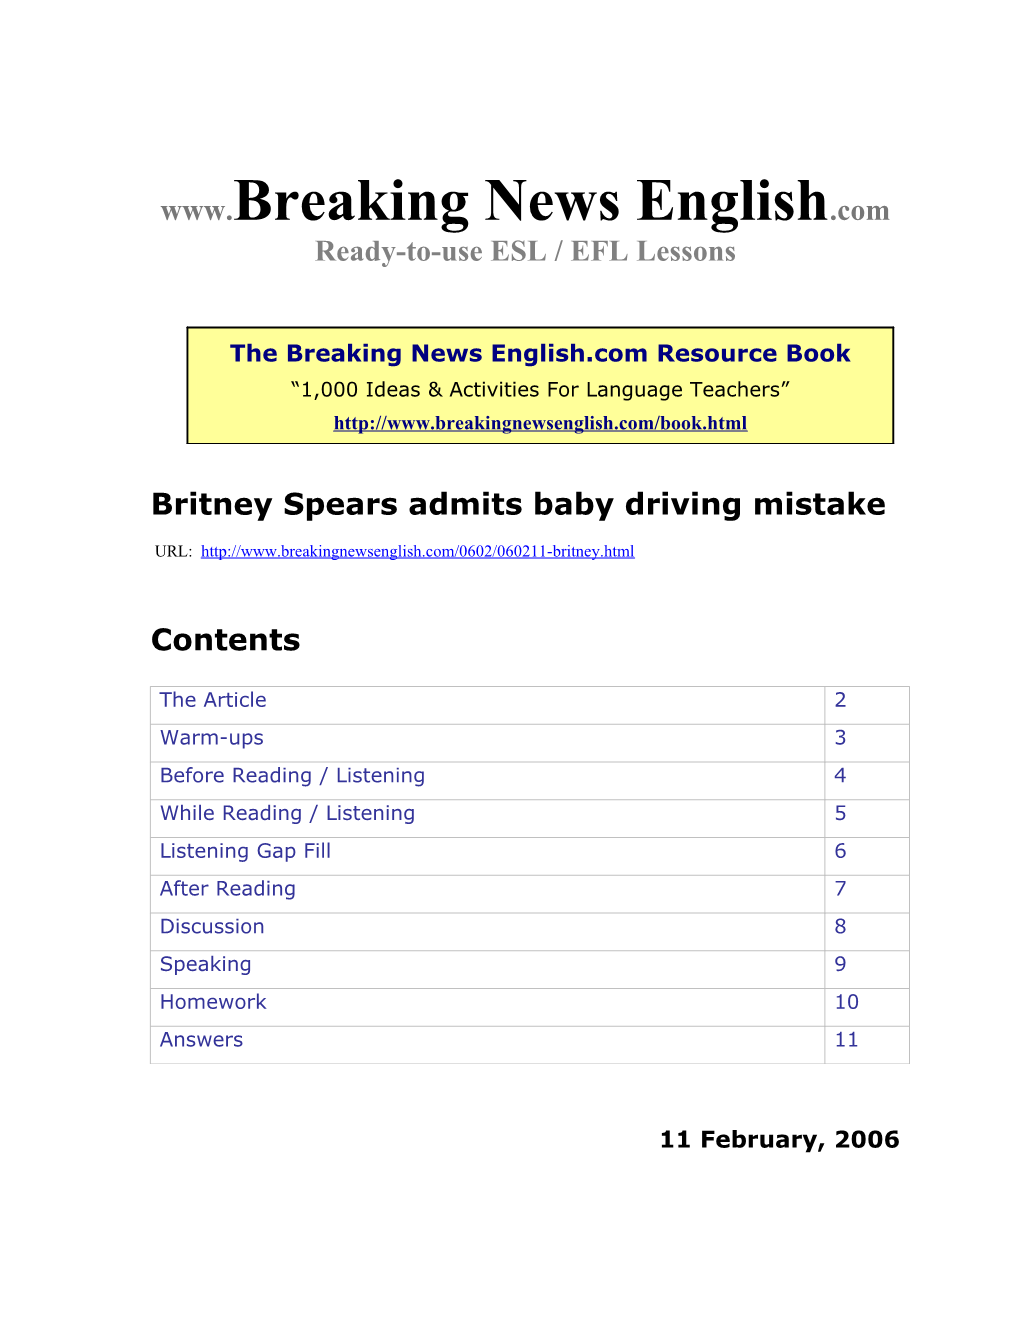 Britney Spears Admits Baby Driving Mistake